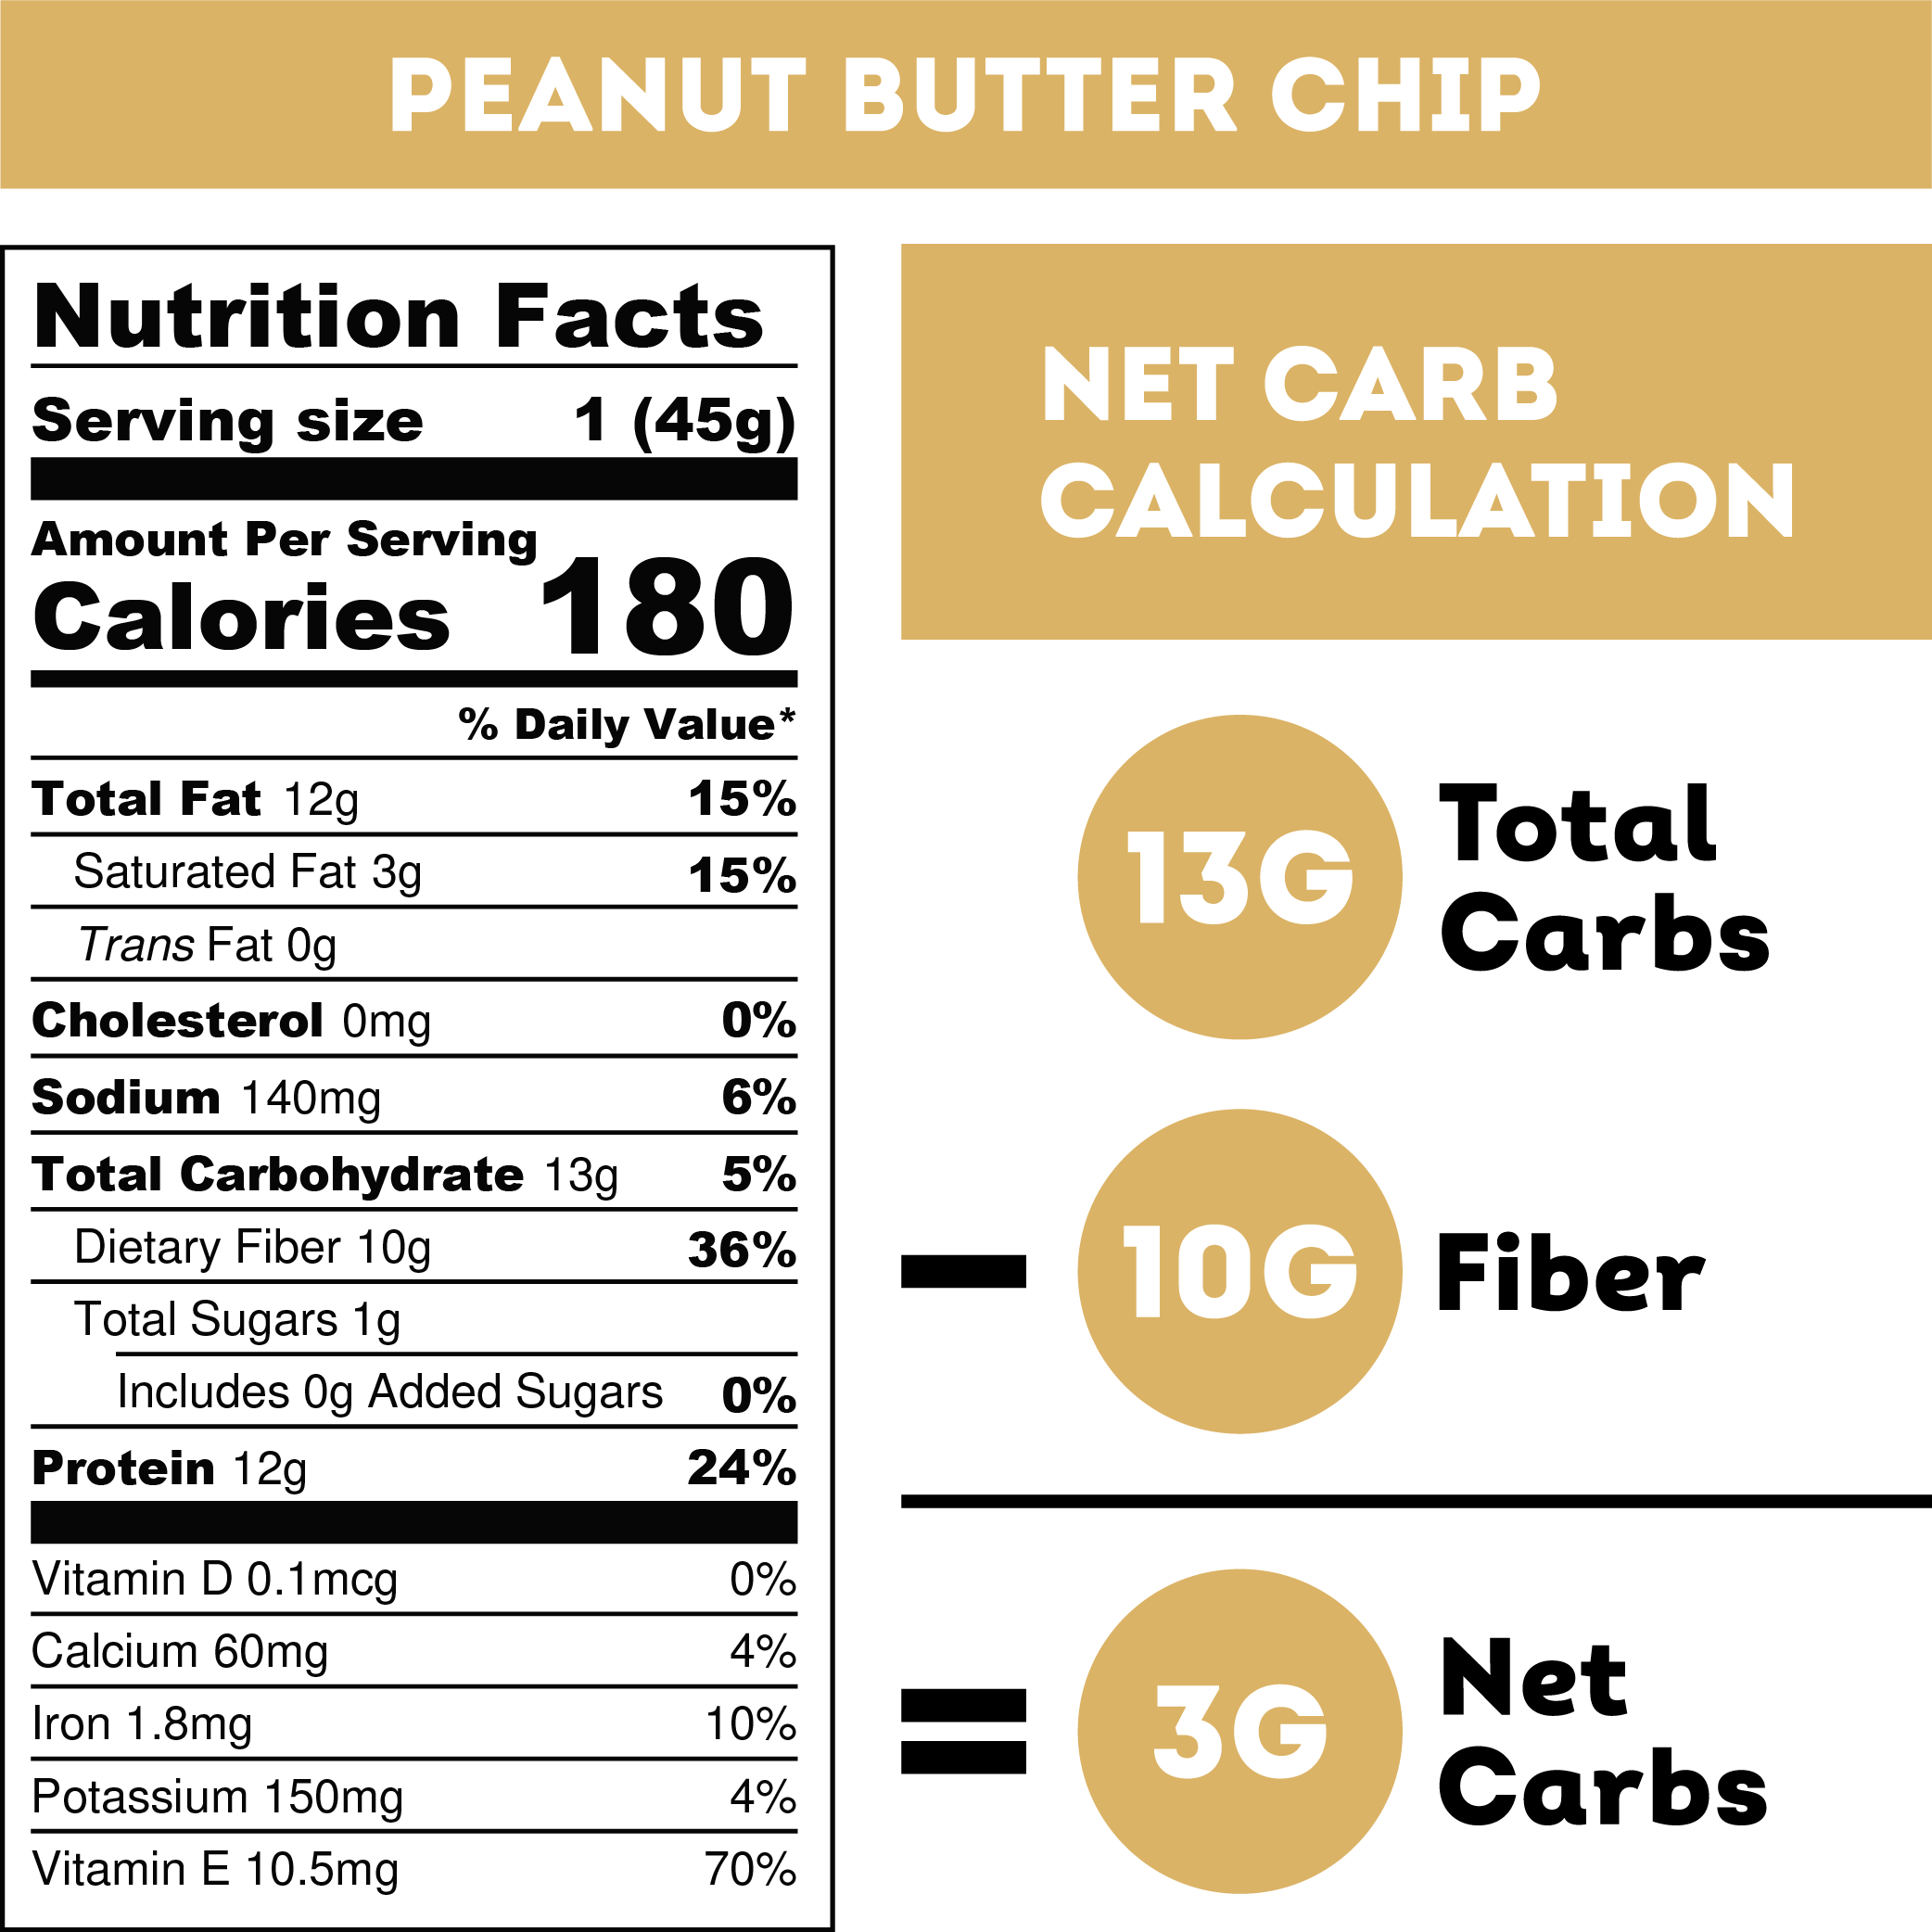 Peanut Butter Chip Nutrition Facts. Serving Size: 1 (45 grams). Amount Per Serving. Calories: 180. % Daily Value. Total Fat: 12 grams, 15%. Saturated Fat: 3 grams, 15%. Trans Fat: 0 grams. Cholesterol: 0 milligrams, 0%. Sodium: 140 milligrams, 6%. Total Carbohydrate: 13 grams, 5%. Dietary Fiber: 10 grams, 36%. Total Sugars: 1 gram. Includes: 0 grams Added Sugars, 0%. Protein: 12 grams, 24%. Vitamin D: 0.1 micrograms, 0%. Calcium: 60 milligrams, 4%. Iron: 1.8 milligrams, 10%. Potassium: 150 milligrams, 4%. Vitamin E: 10.5 milligrams, 70%.